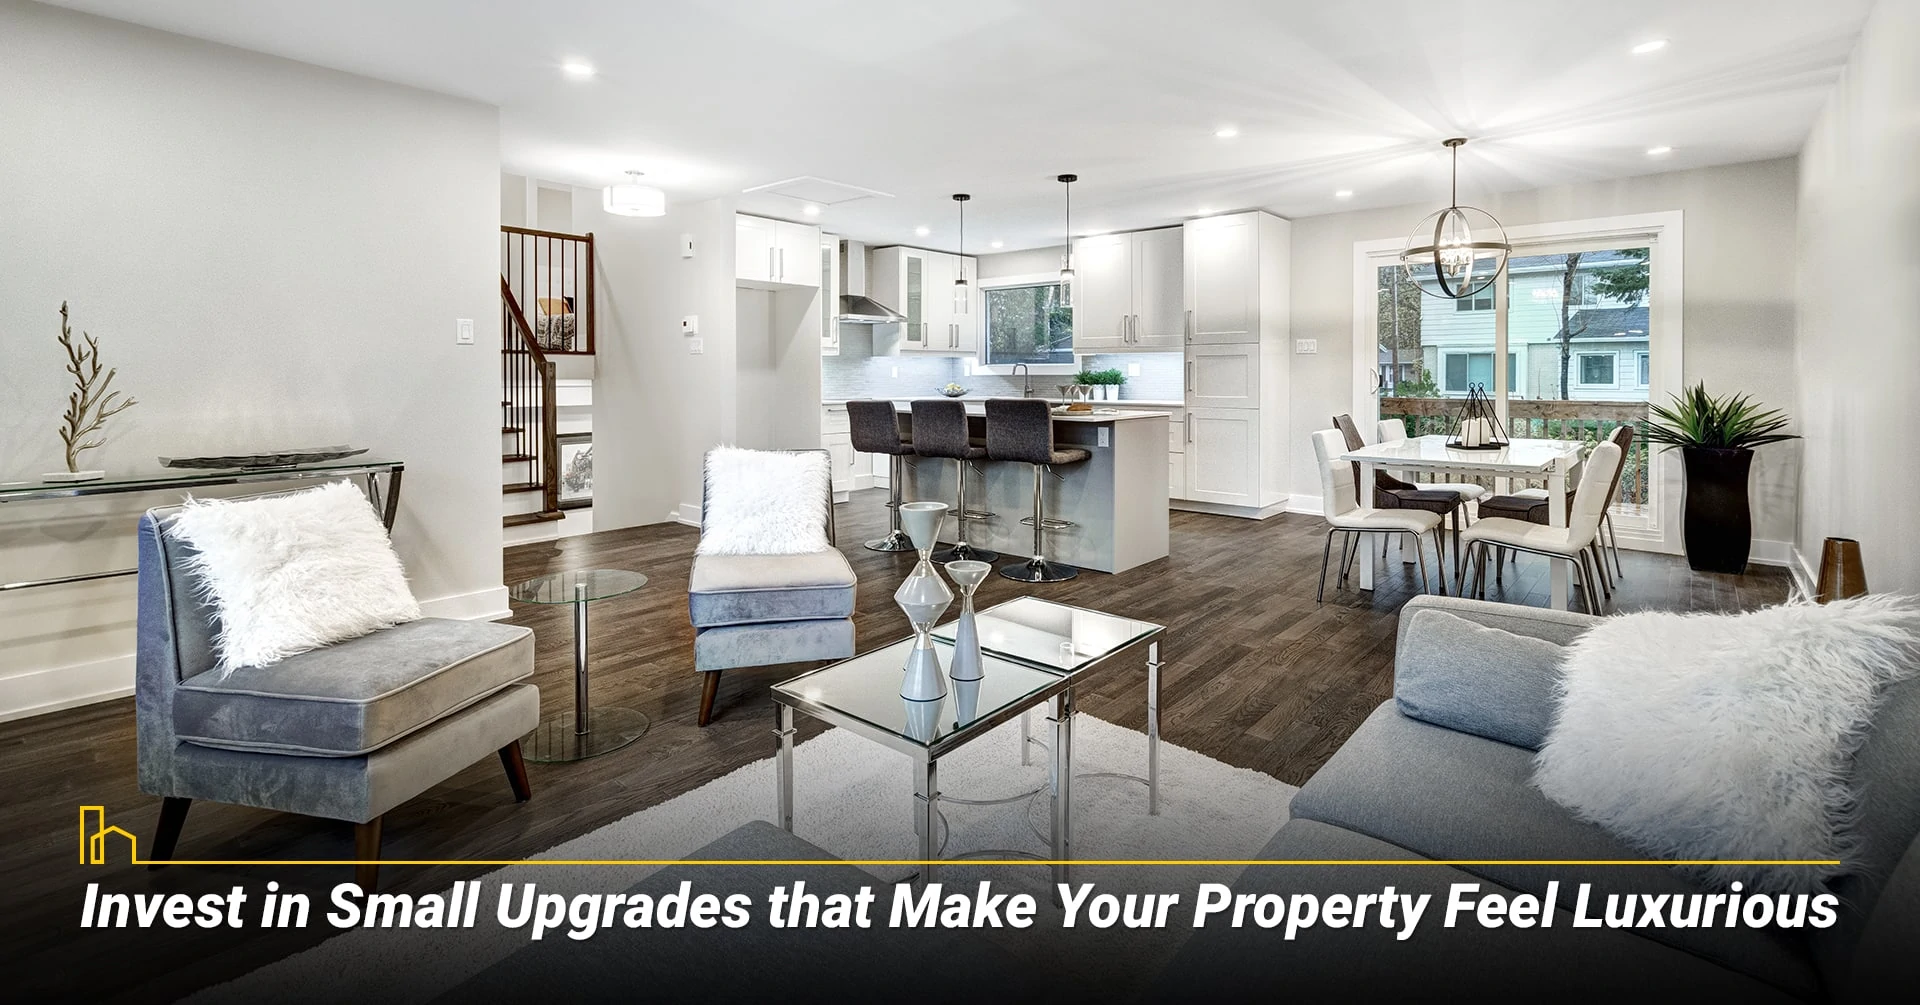 Invest in Small Upgrades that Make Your Property Feel Luxurious, upgrade your property